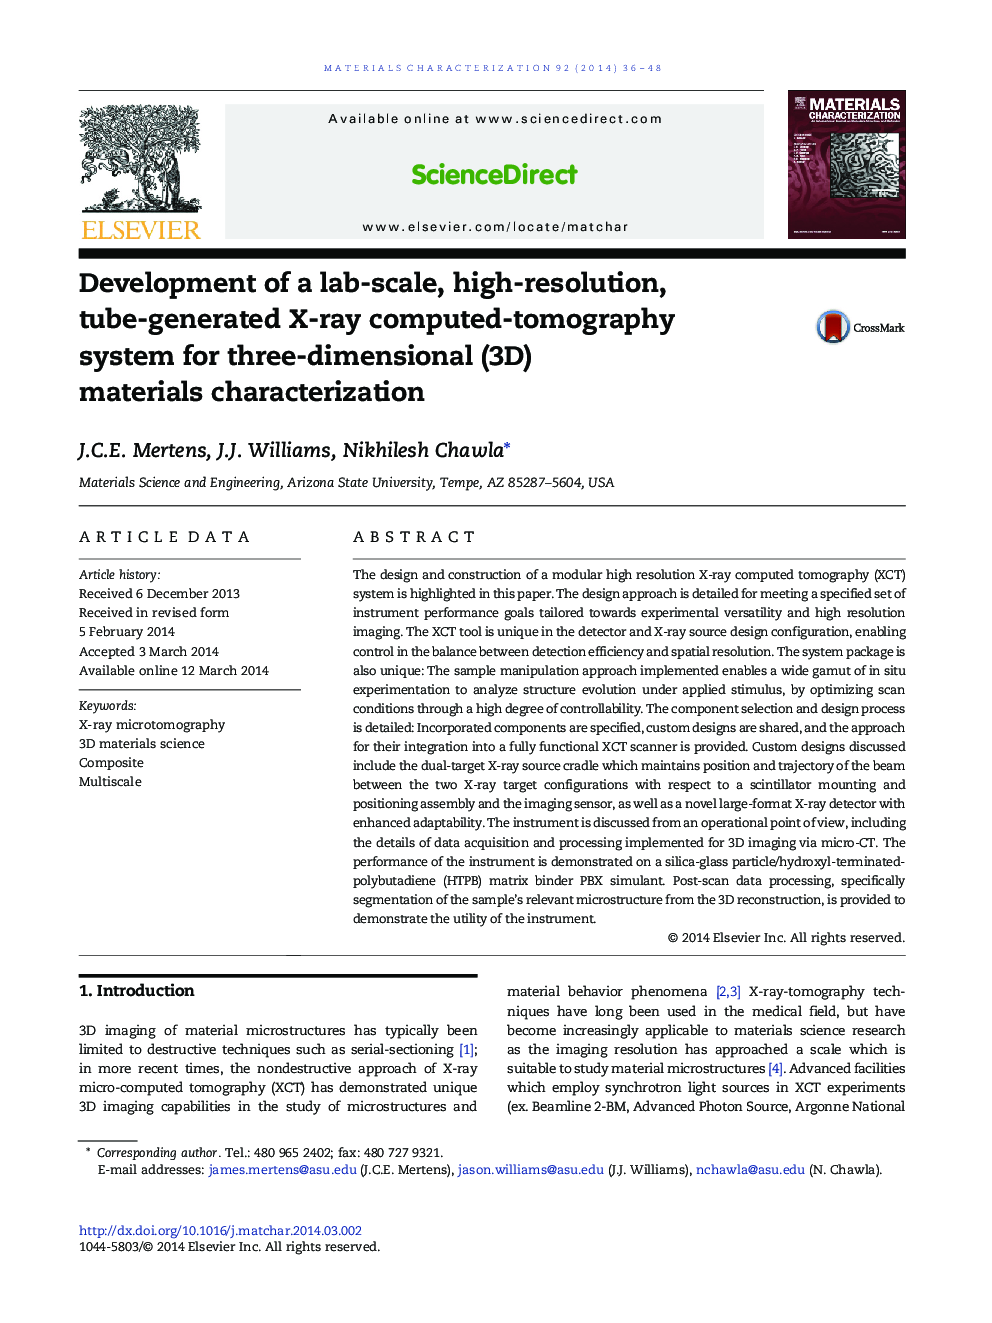 Development of a lab-scale, high-resolution, tube-generated X-ray computed-tomography system for three-dimensional (3D) materials characterization